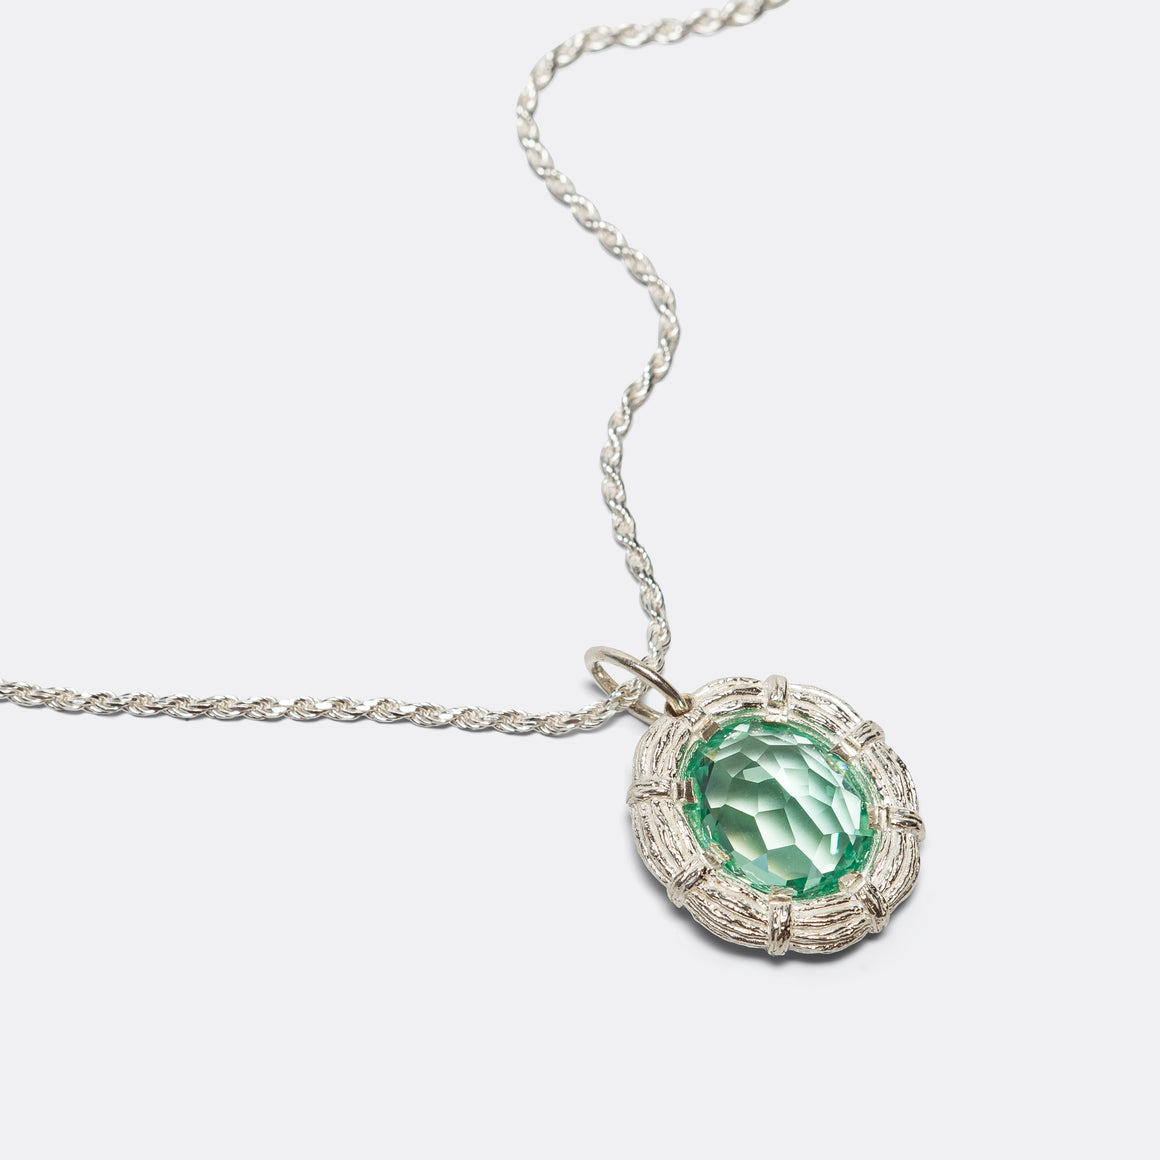 Bleue Burnham - Bound Willow Pendant - 925 Silver/Green Sapphire - UP THERE